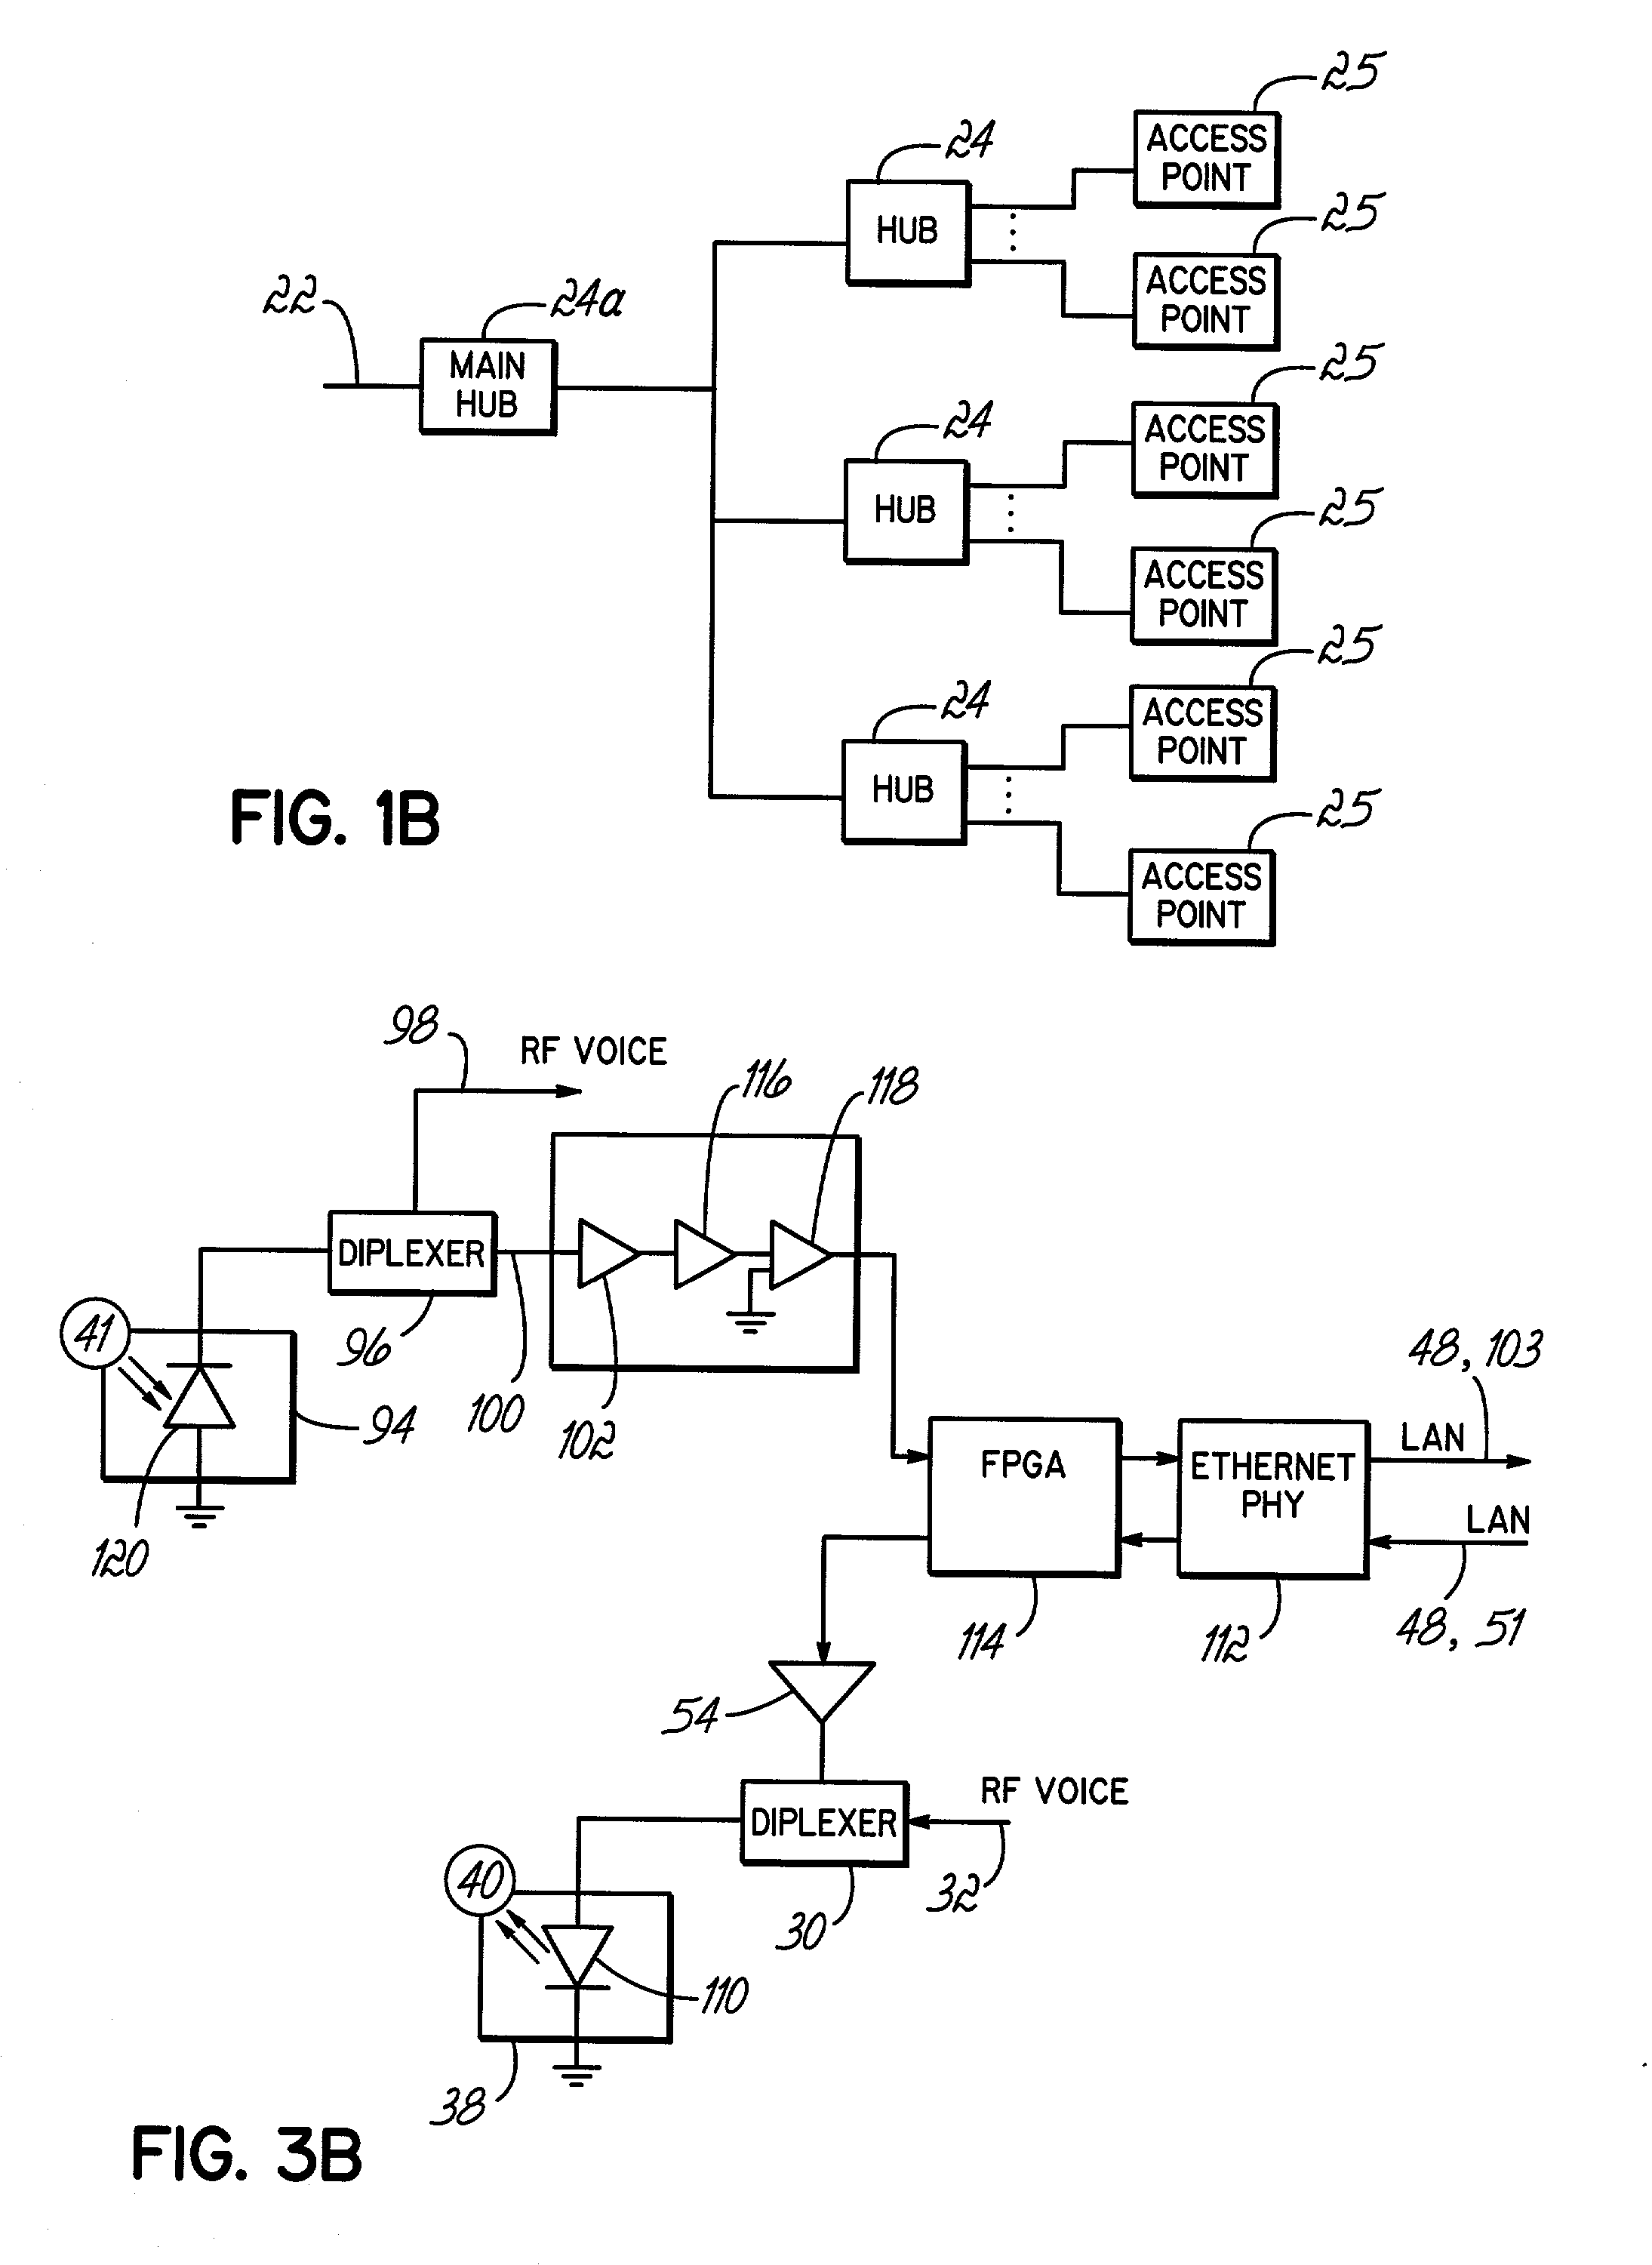 Indoor wireless voice and data distribution system